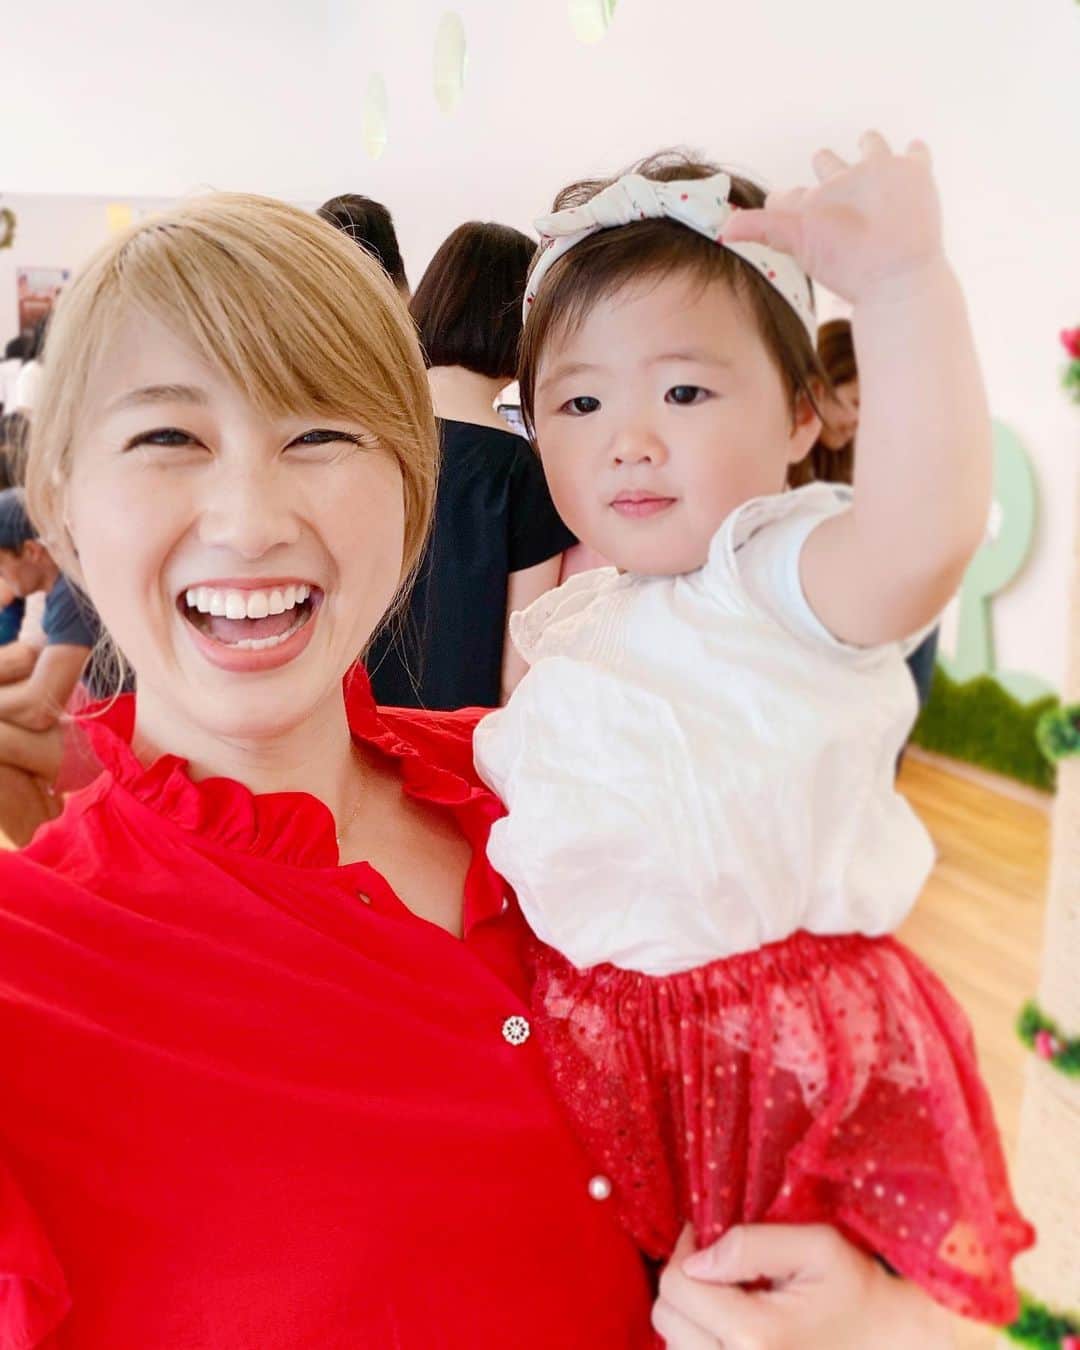 吉田ちかさんのインスタグラム写真 - (吉田ちかInstagram)「Yay! You did it, Pudding!!﻿ Pudding had her first ever dance recital yesterday at her daycare’s Xmas party! I felt so excited and nervous at the same time waiting for her to come out, it was a feeling I had never felt before. So this is what being a parent feels like! It was a new experience for both of us! ﻿ ﻿ She was doing well at first showing off her dancing skills, but then she noticed mommy and daddy. I blew her a kiss, which she took as goodbye and started bawling lol She cried for awhile, but her teachers got her back on track and she was dancing again. ﻿ ﻿ Sadly, I can’t share the footage of the recital, but swipe to see a video of us dancing at home lol We’ve been pretty impressed with her new moves lately, and now that I think about it, it was probably all that practice she was doing for the recital!﻿ ﻿ イエ〜イ！よくできました！！﻿ なんと昨日はプリンの初めての発表会！今通っているクアラルンプールのデイケアのクリスマスパーティーで踊りのパフォーマスがあったんです❤️ ドキドキ・ワクワクしながらプリンの登場を待っている自分、あ〜親になったんだな〜！と改めて実感。﻿ ﻿ 最初は堂々と得意なダンスを披露していたプリンでしたが、ママとパパに気づいた瞬間動揺w ママが投げキスをすると「バイバイ」だと勘違いし、大泣き😭 しばらく泣いてしまいしたが、先生たちが上手くあやしてくれて後半はしっかり踊れていました！﻿ ﻿ 残念ながら、発表会の様子はシェアできませんが、代わりに家で踊っている様子をどうぞ！最近振り付けがよりパワーアップしたな〜と思っていたのですが、もしかしたら発表会の練習の効果だったのかも！﻿」12月8日 18時11分 - bilingirl_chika